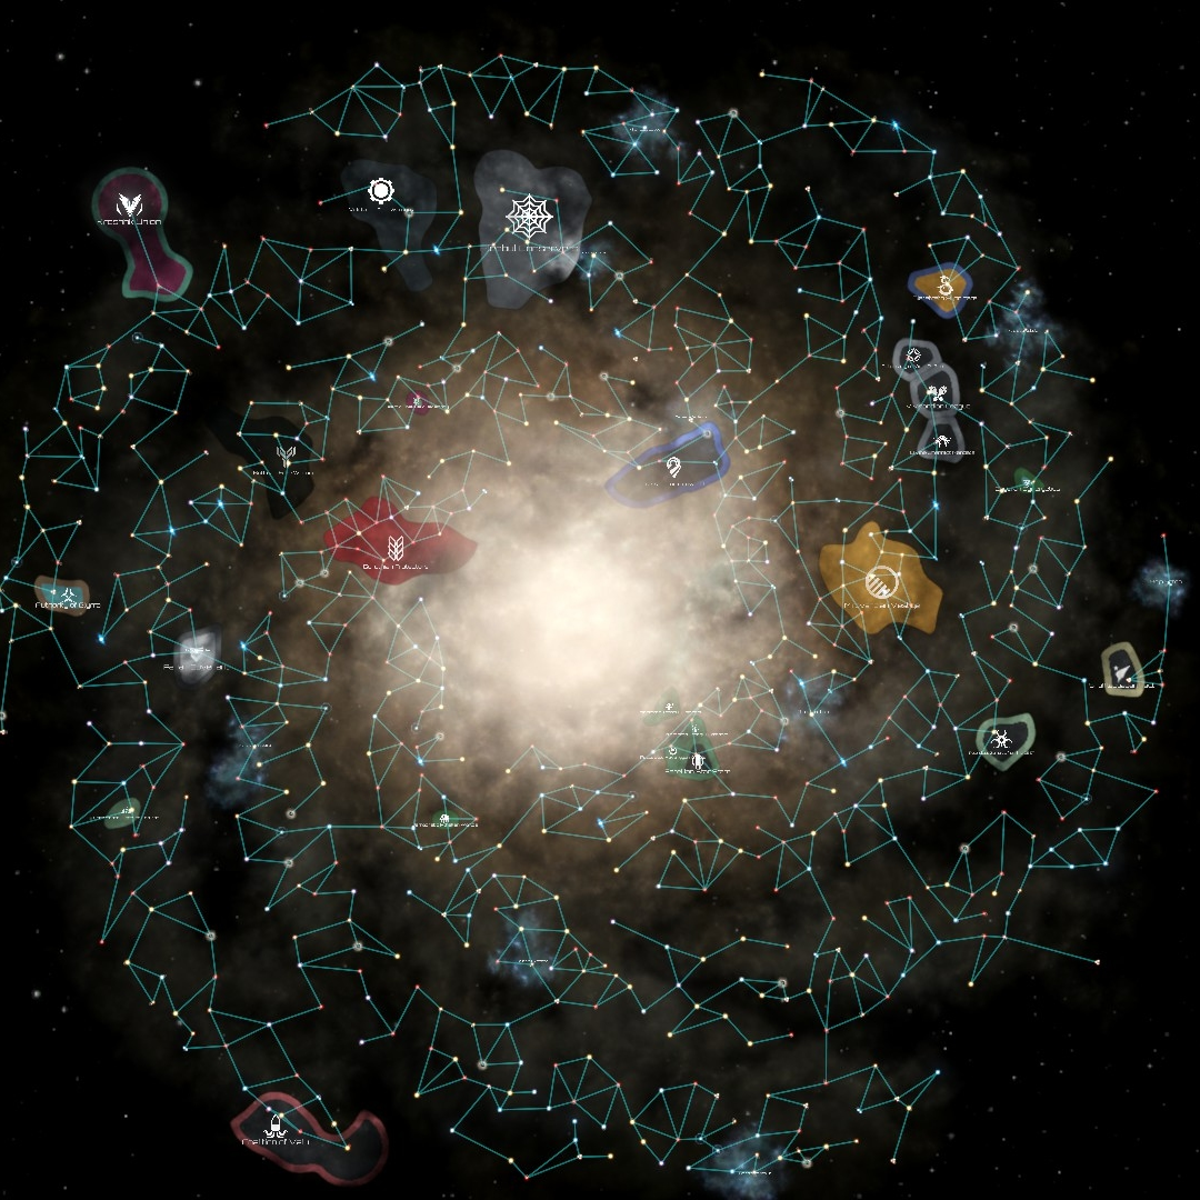 Stellaris' 3.6 Orion update warps in new galaxy shapes and a